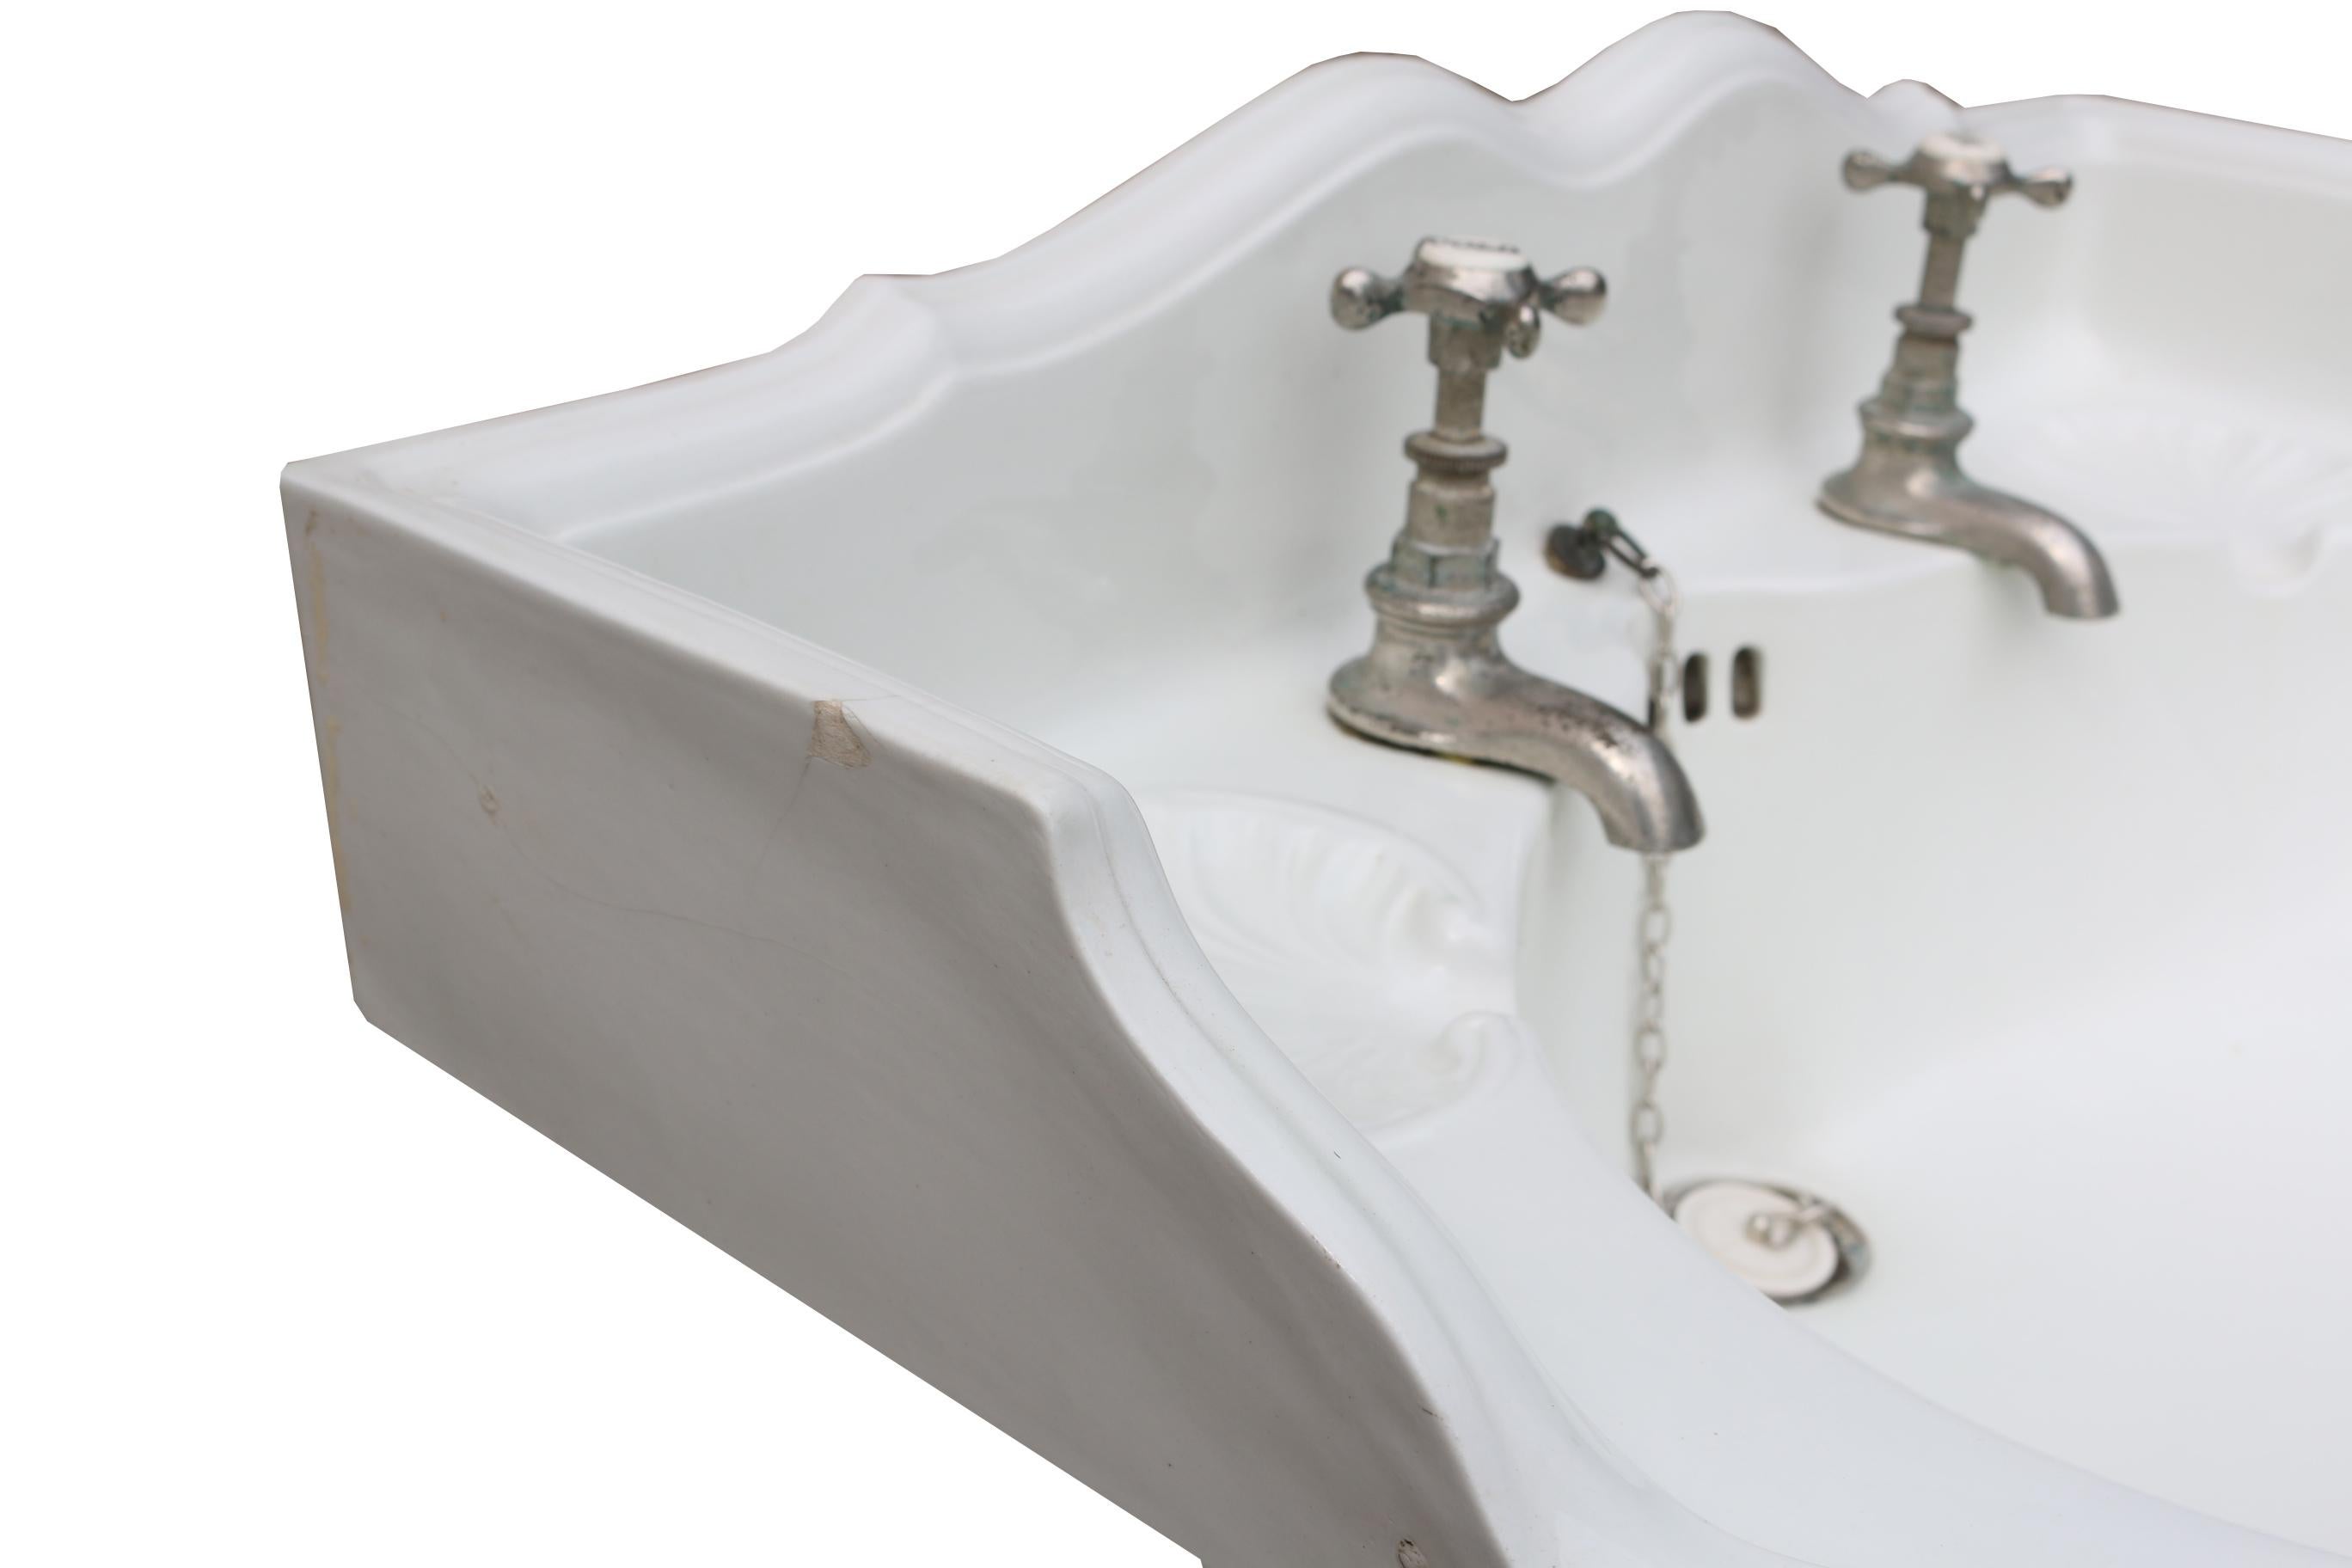 About

This antique wash basin features a cast iron wall-mounted bracket that has been sand blasted and primed, ready for painting

Condition report

In excellent condition. Porcelain basin with no crazing or damage to the inside bowl.